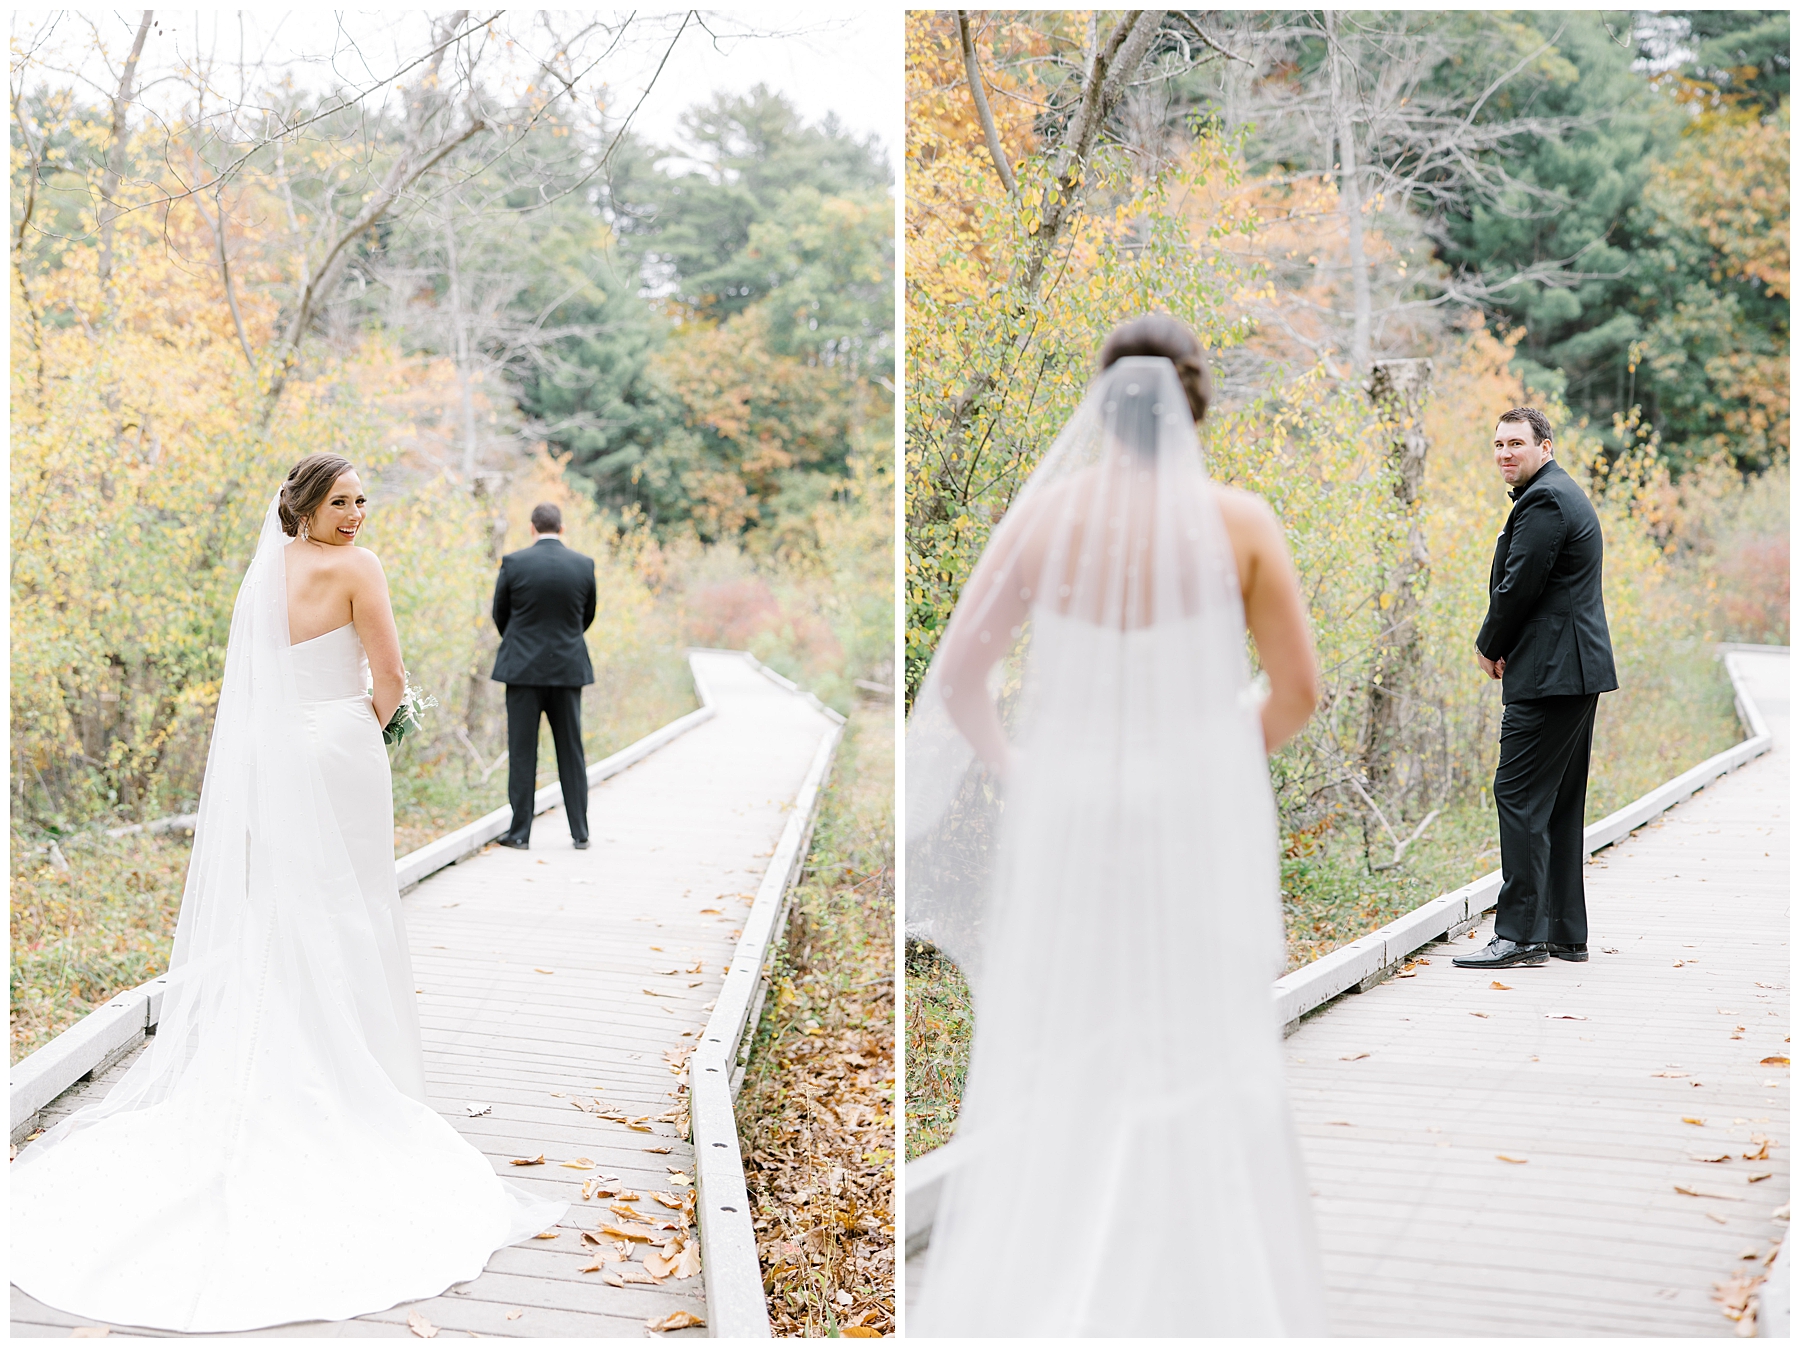 bride walking up on groom for first look moment